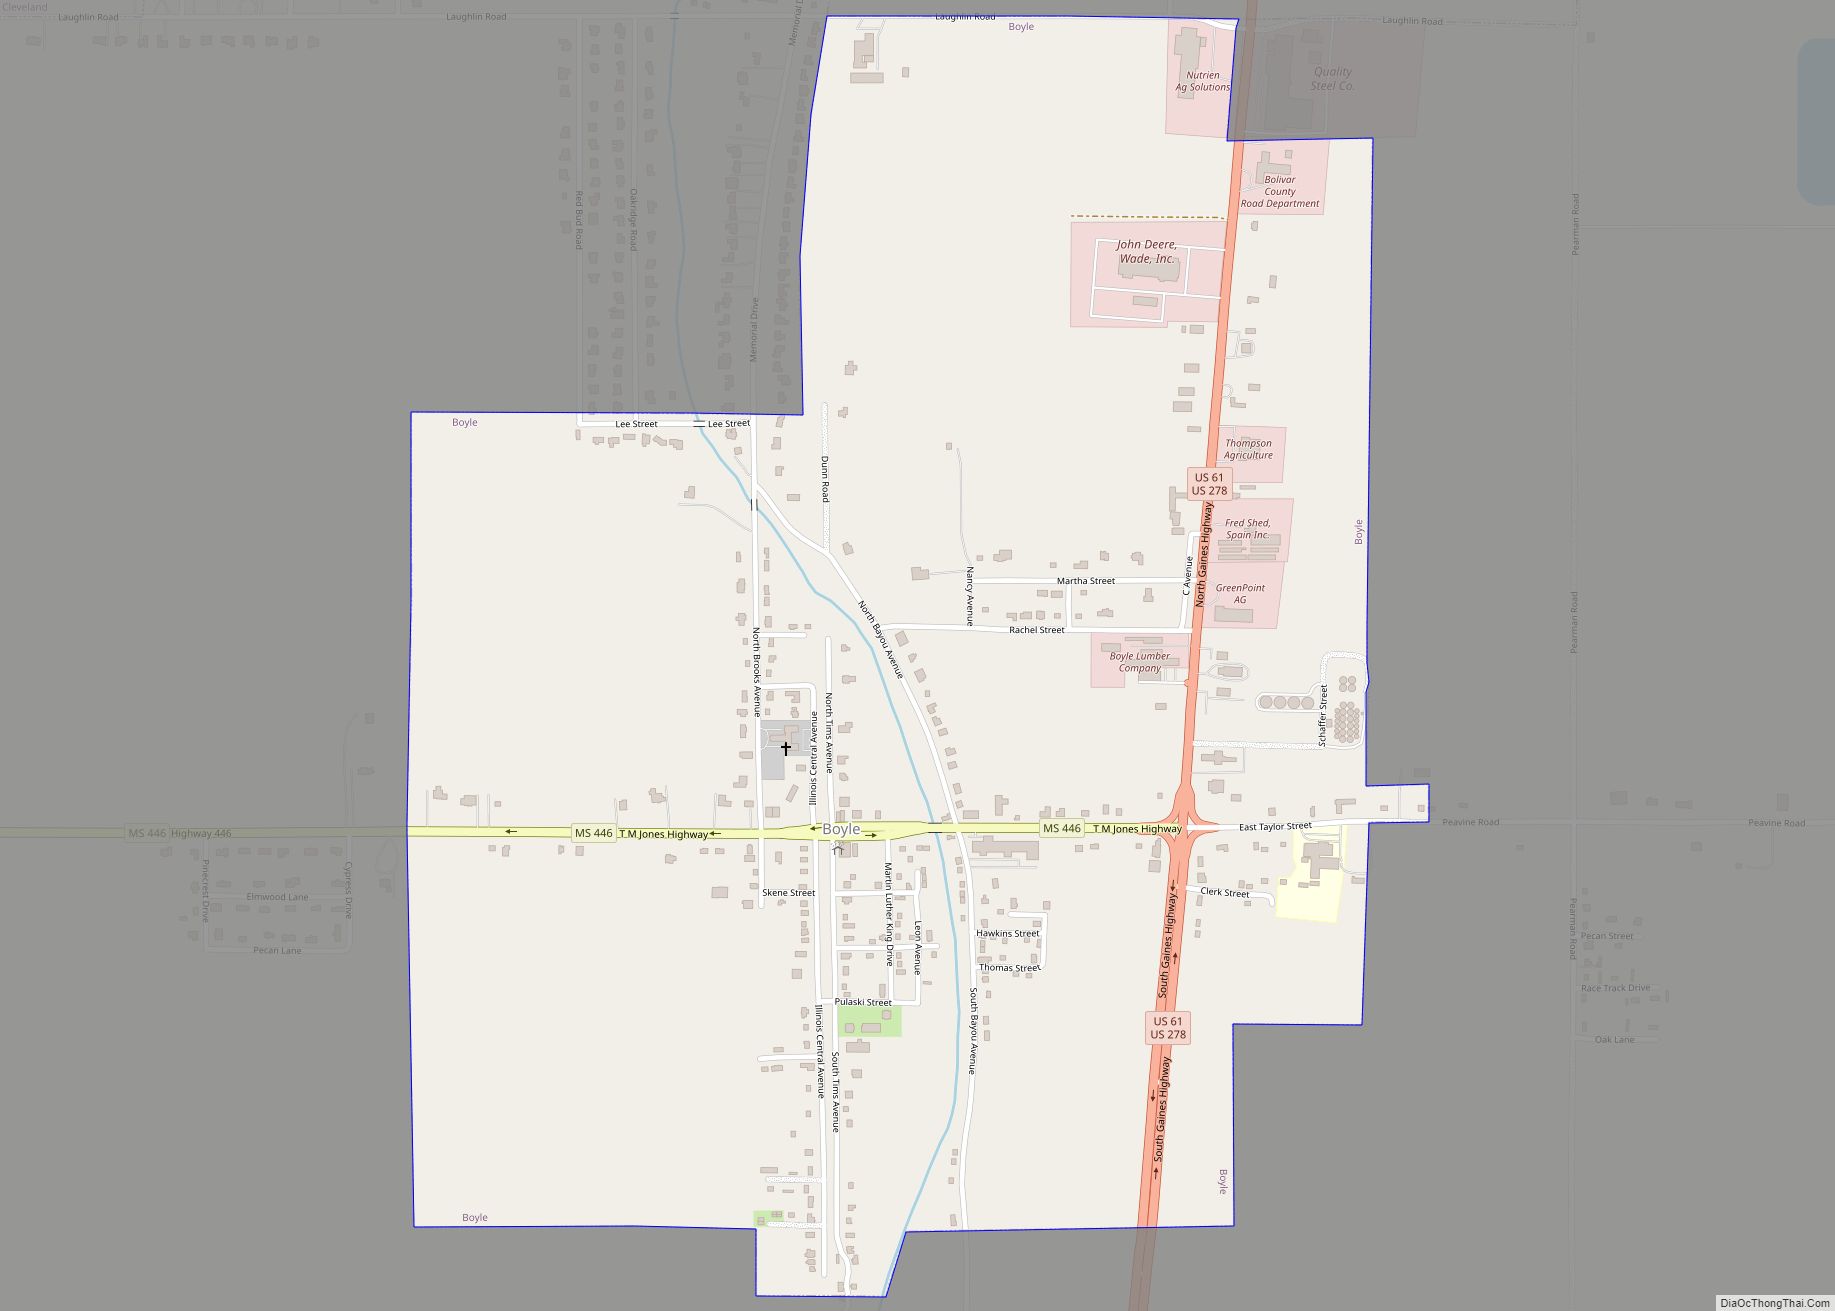 Map of Boyle town